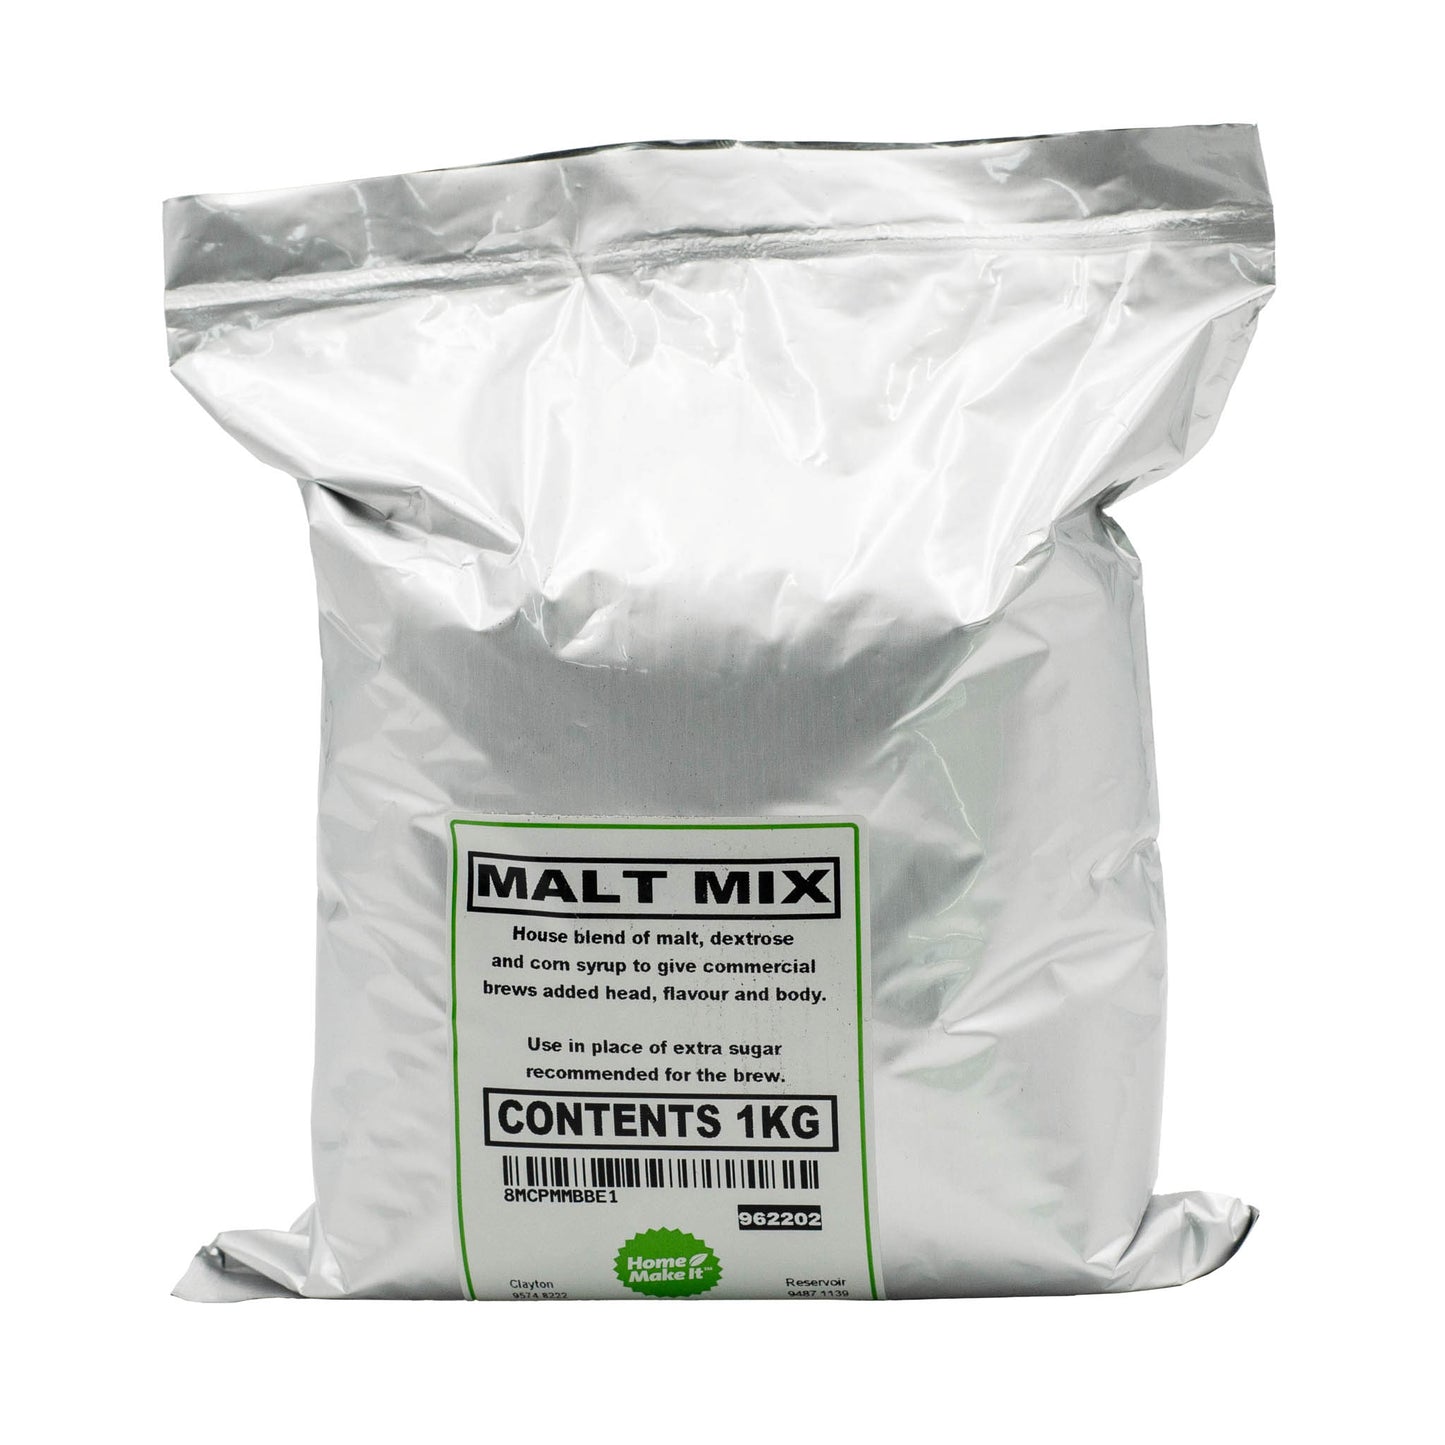 1 kg bag of mixed dried malts to add body and head to beer. Use in place of dextrose brewing sugar. 